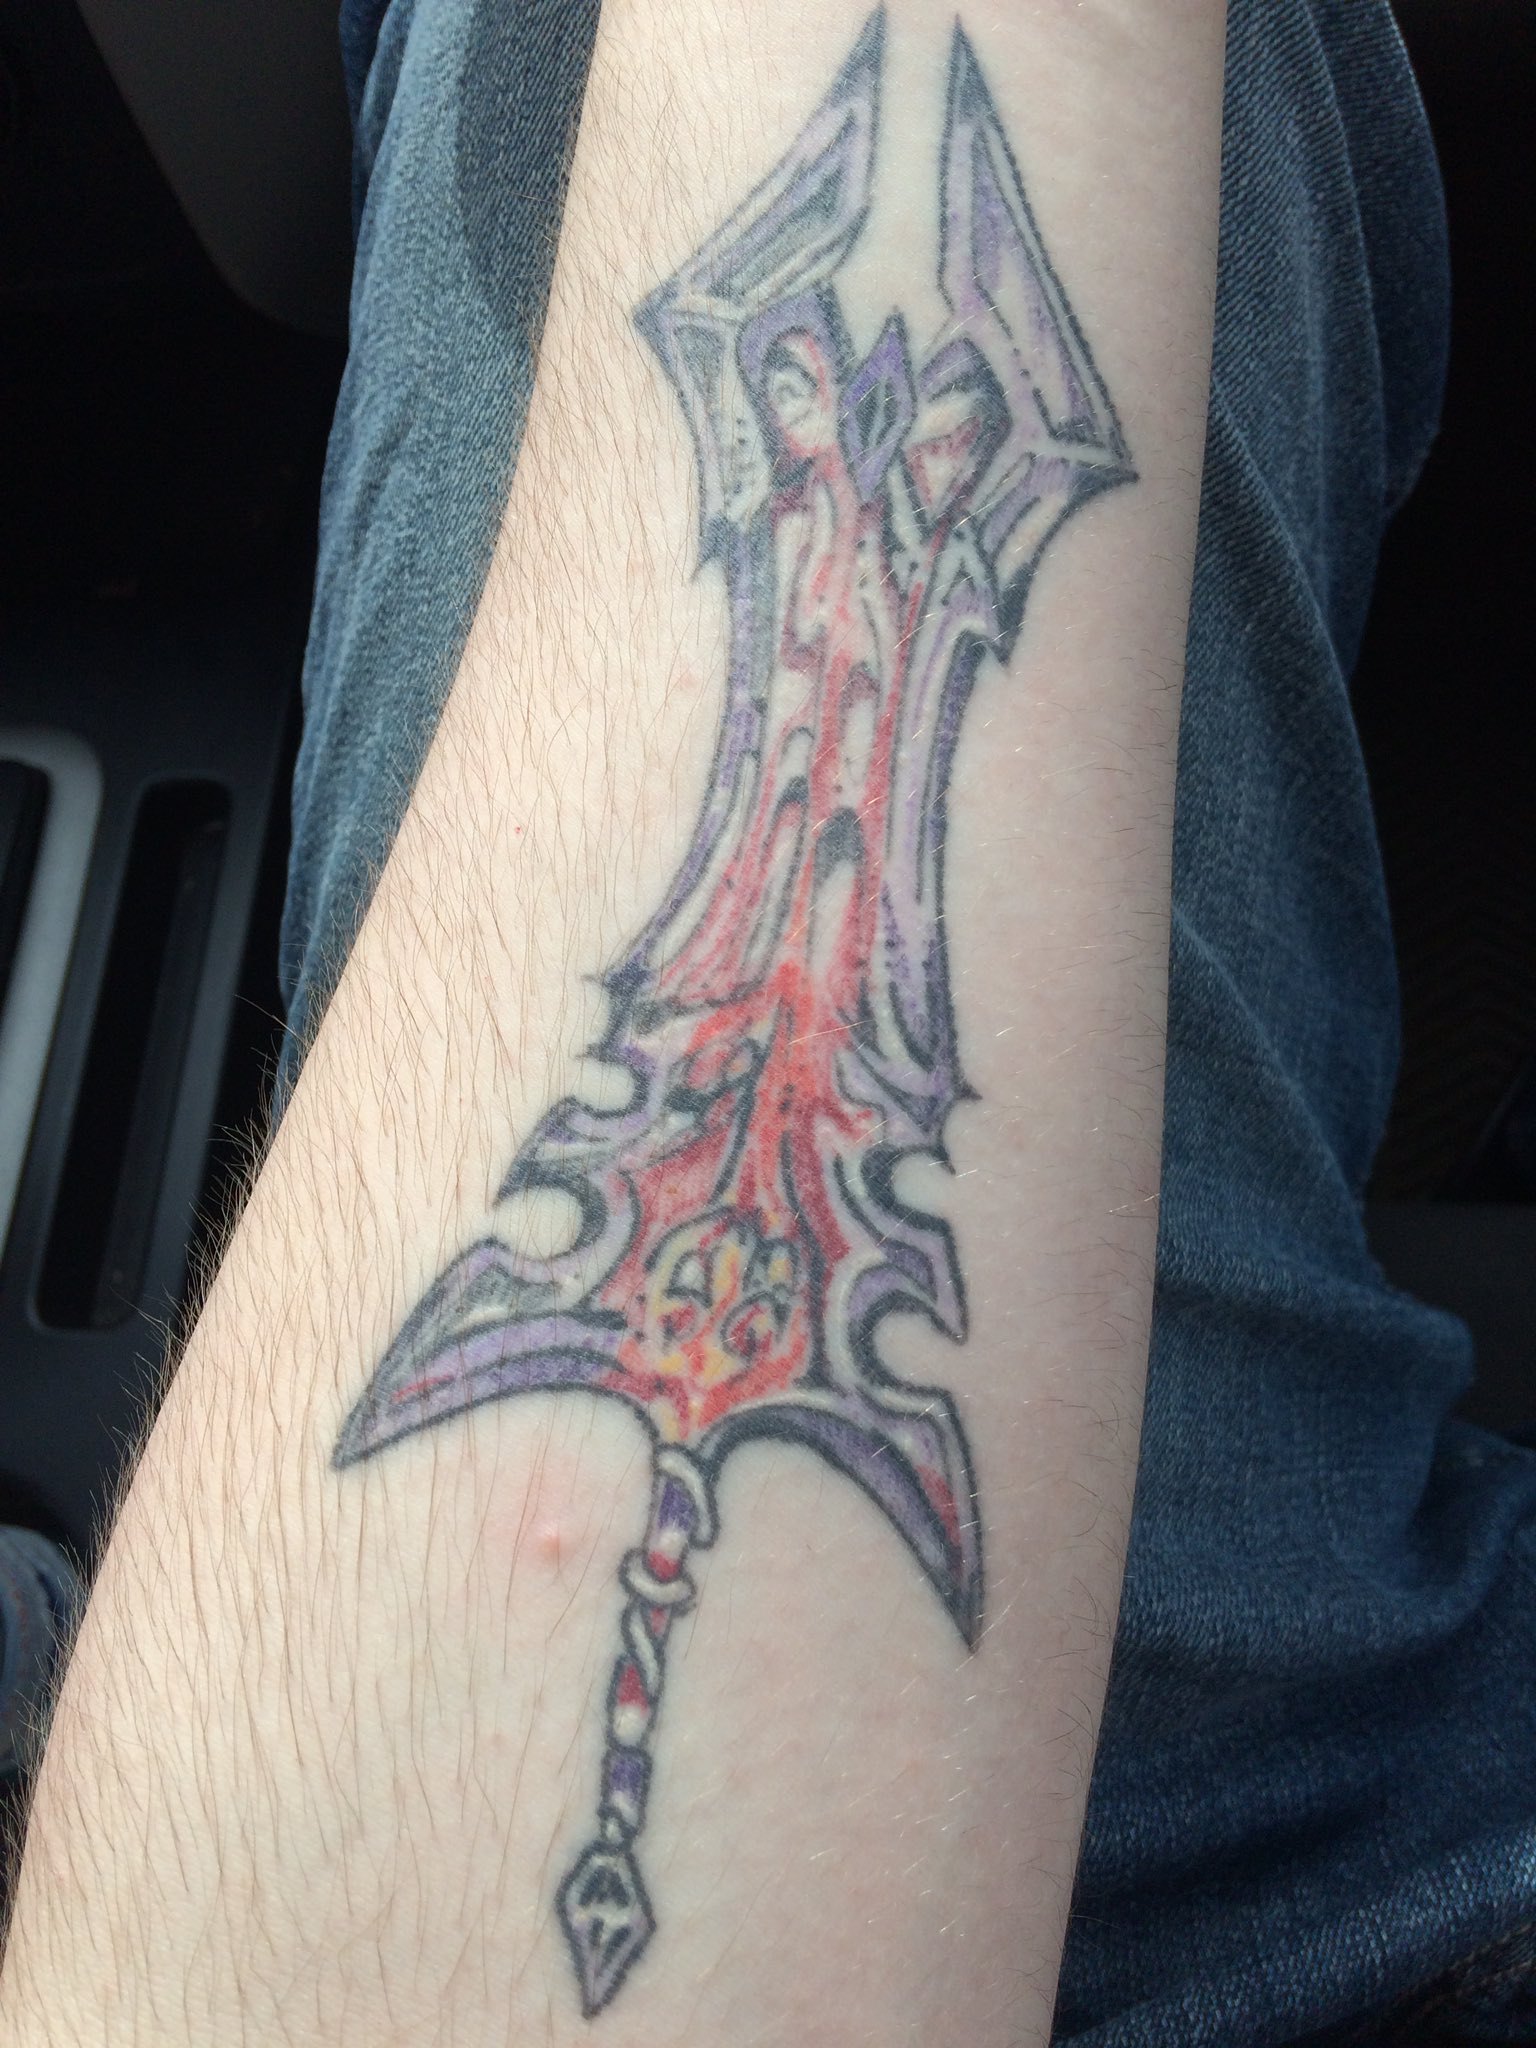 Zombie Faust on X: "My Aatrox tattoo is like him before and after the changes https://t.co/sjkADeknfx" / X